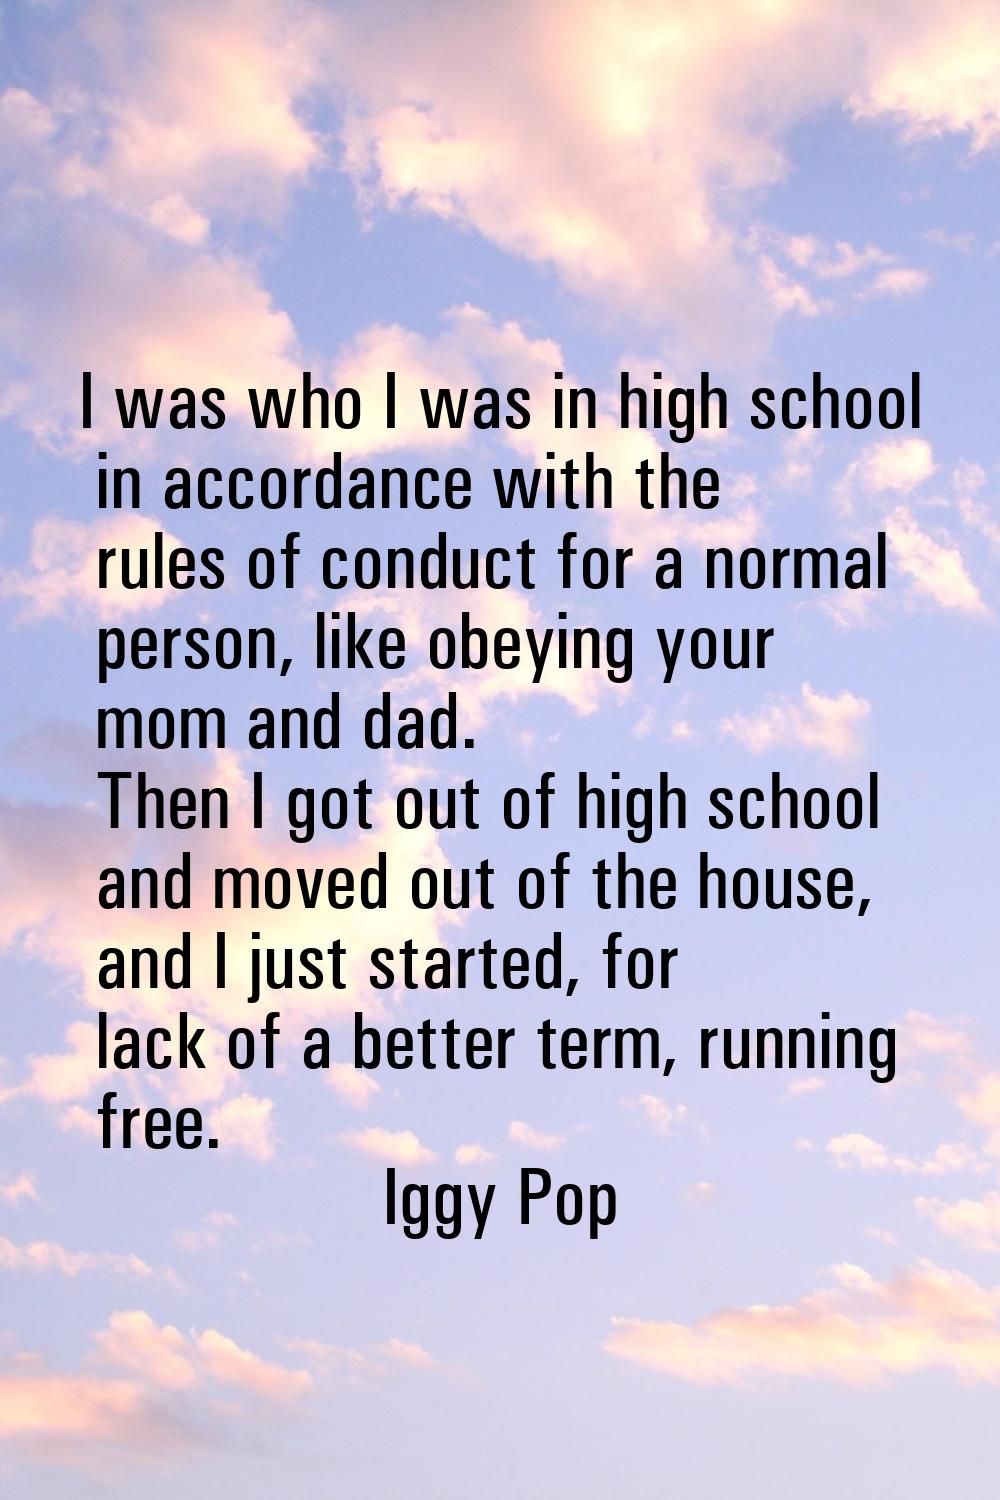 I was who I was in high school in accordance with the rules of conduct for a normal person, like ob